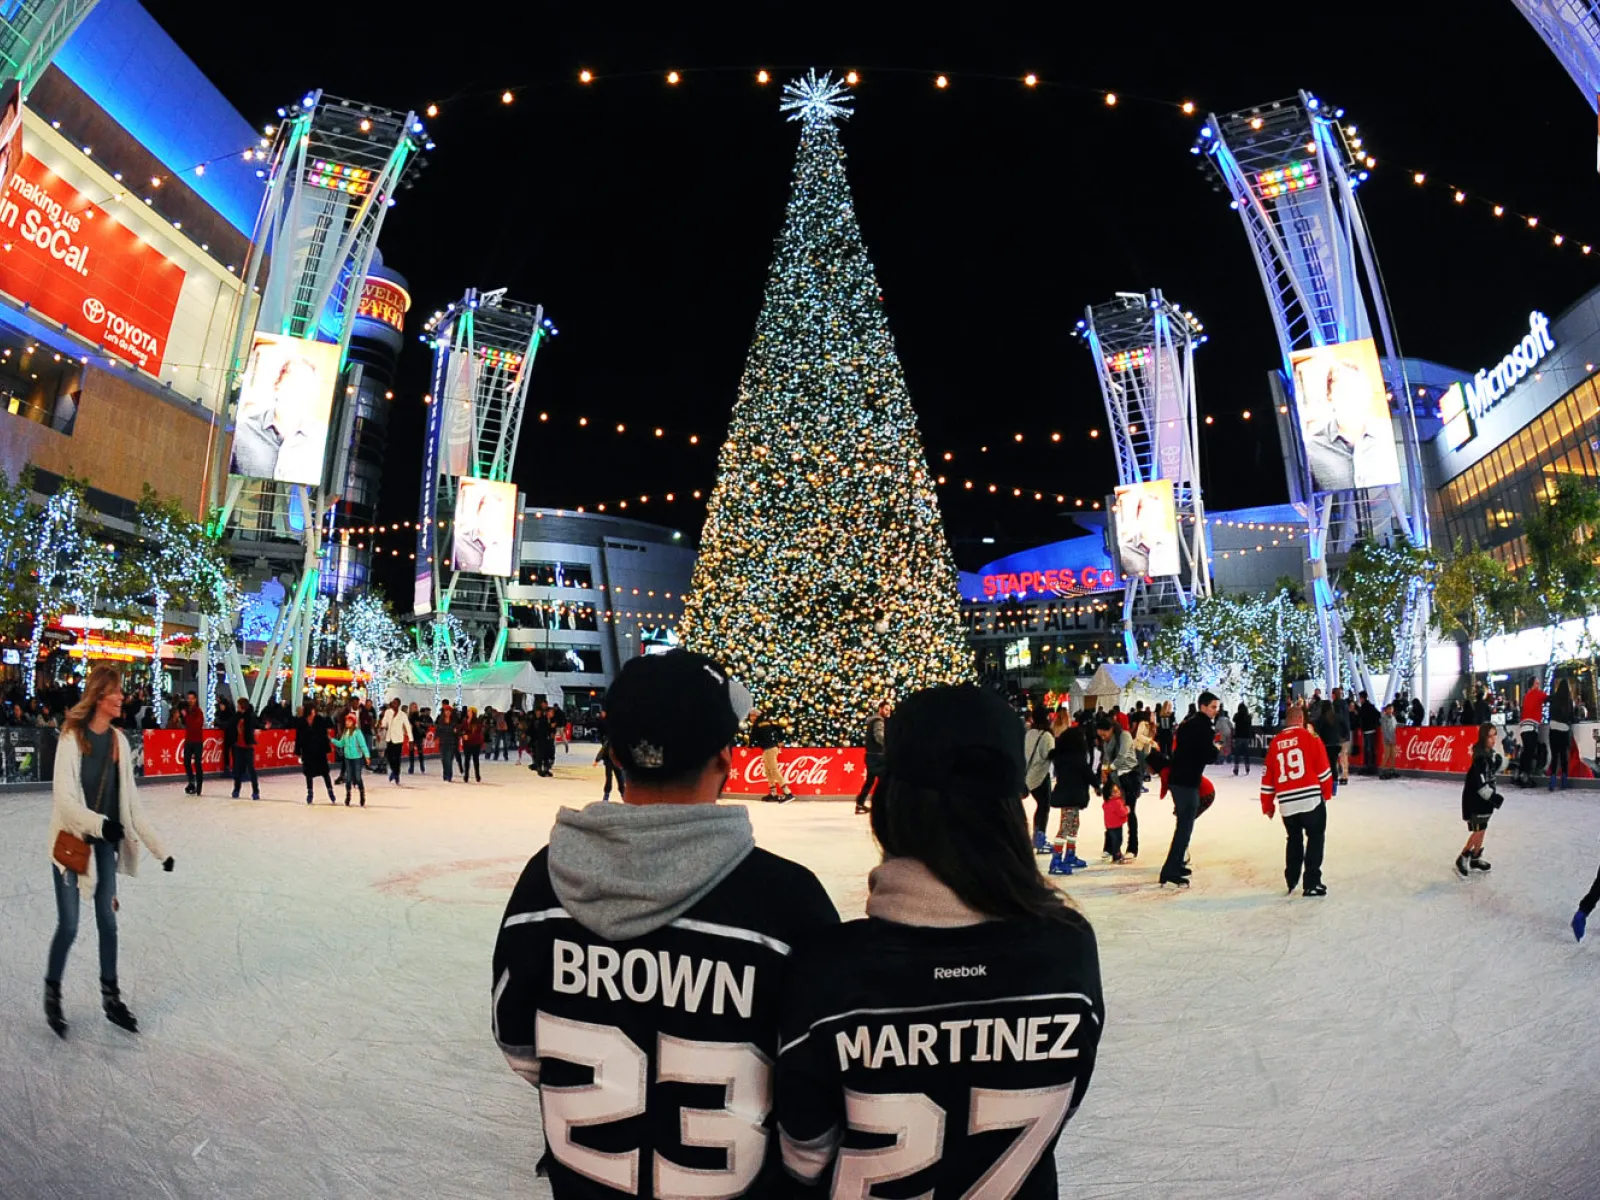 sporting events on christmas day 2020 The Best Holiday Events And Activities In Los Angeles Discover Los Angeles sporting events on christmas day 2020